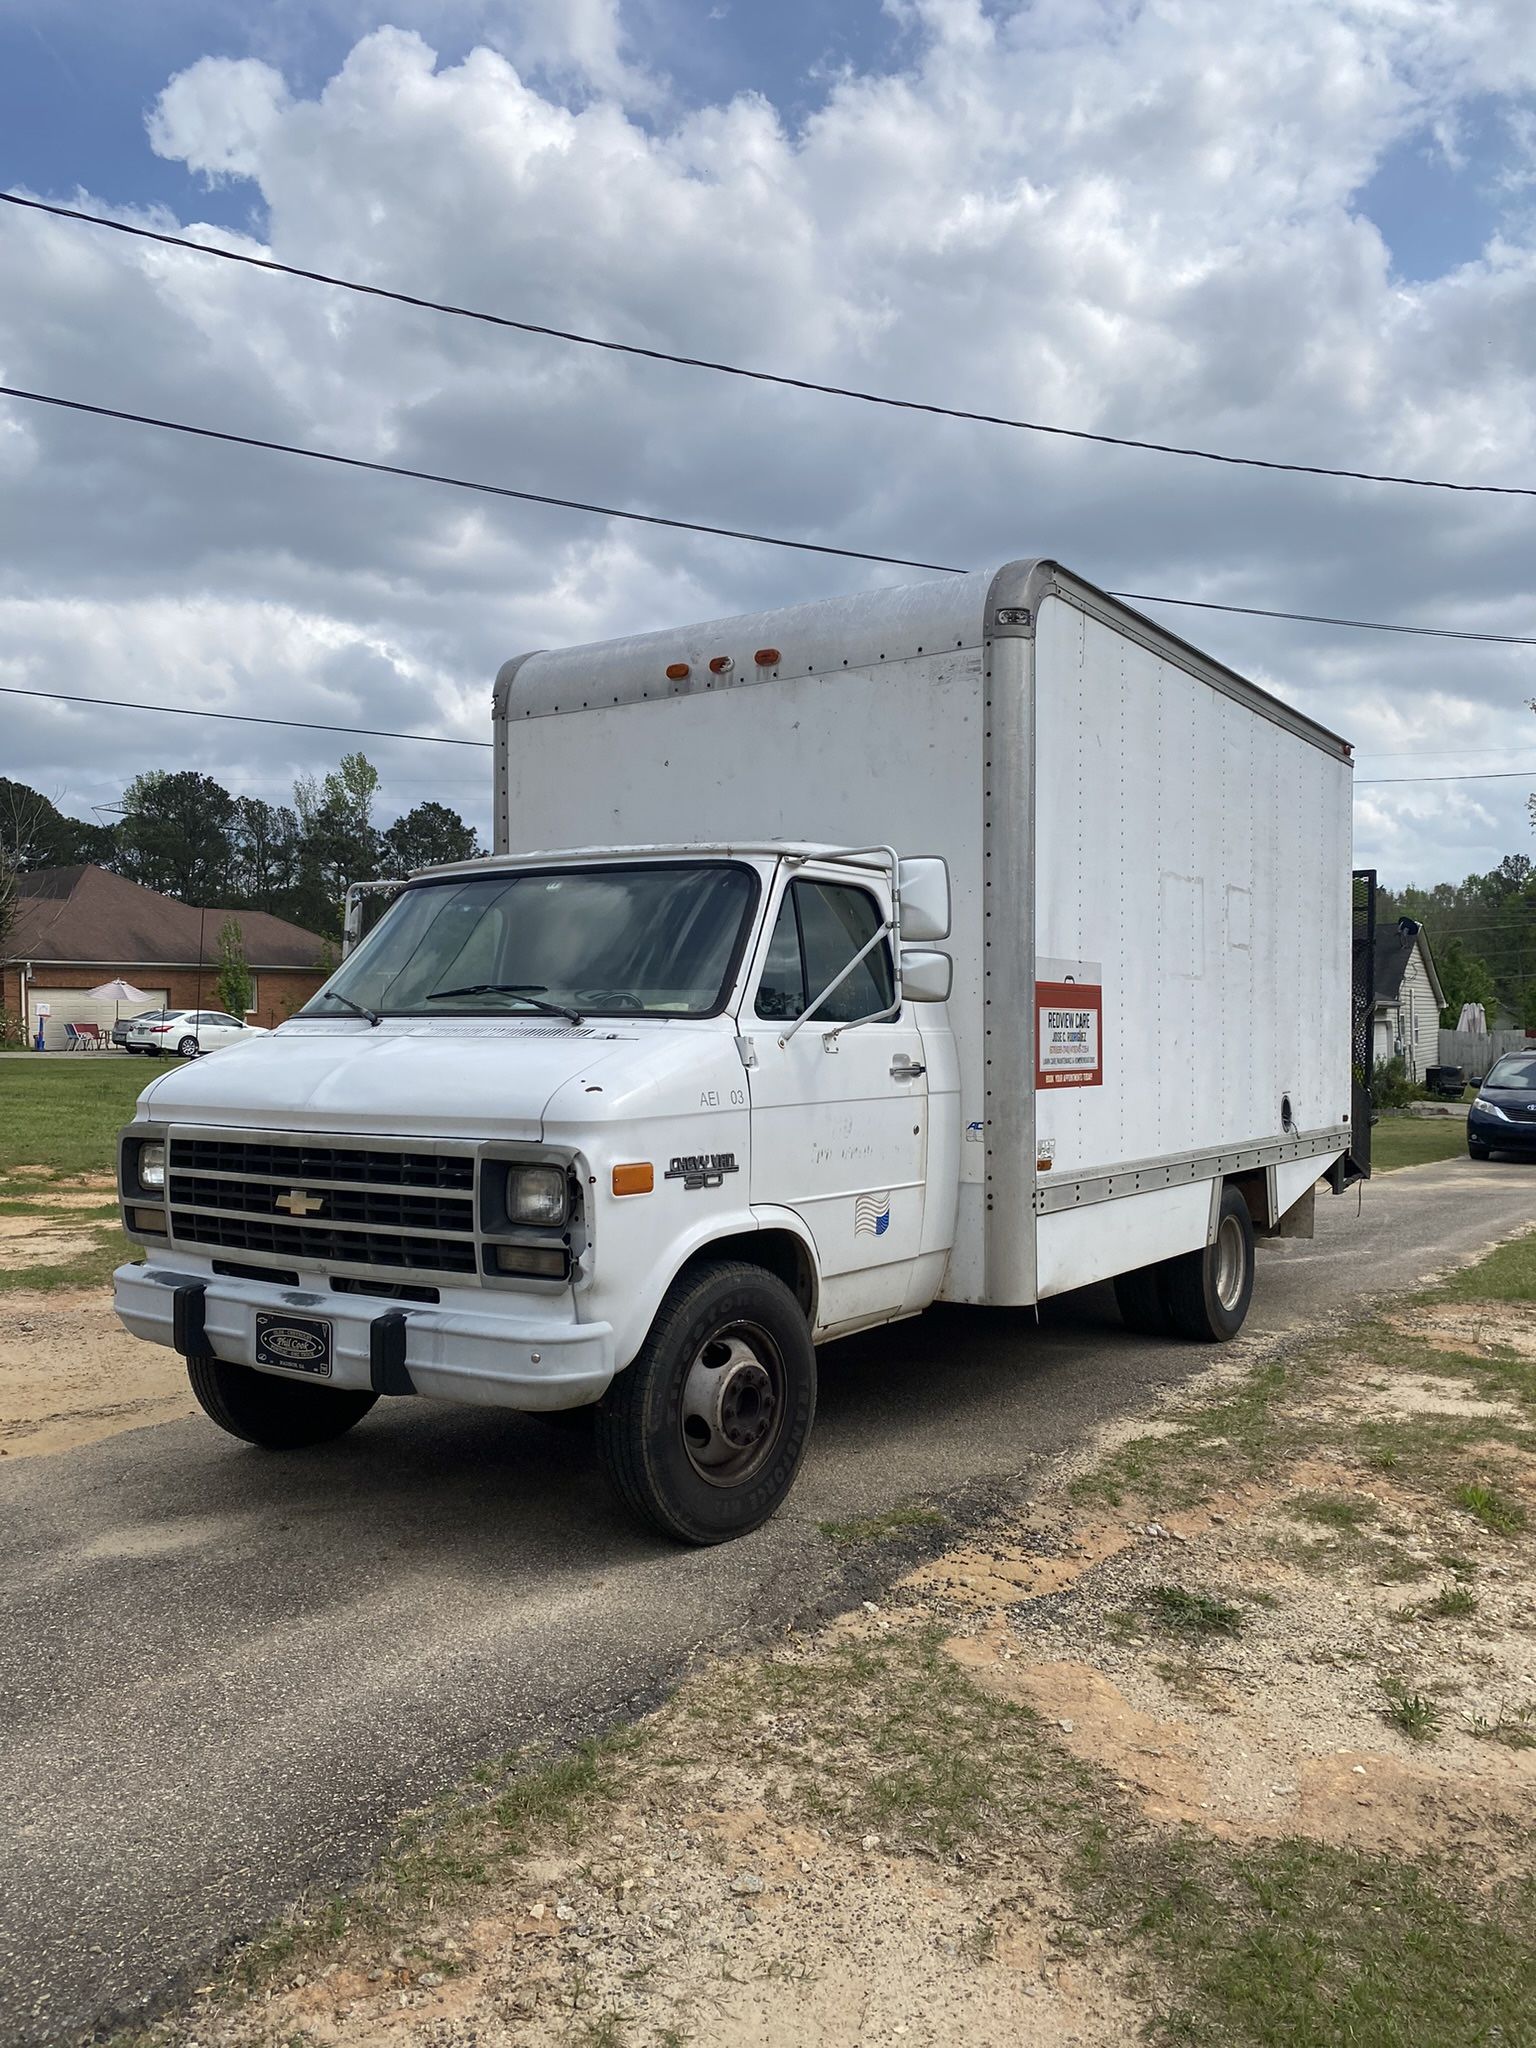 Chevy 30 Box Truck Special For Landscaping 95 Miles 186,000. As Is Engine And Transmission Very Good No Light On Dasbord 